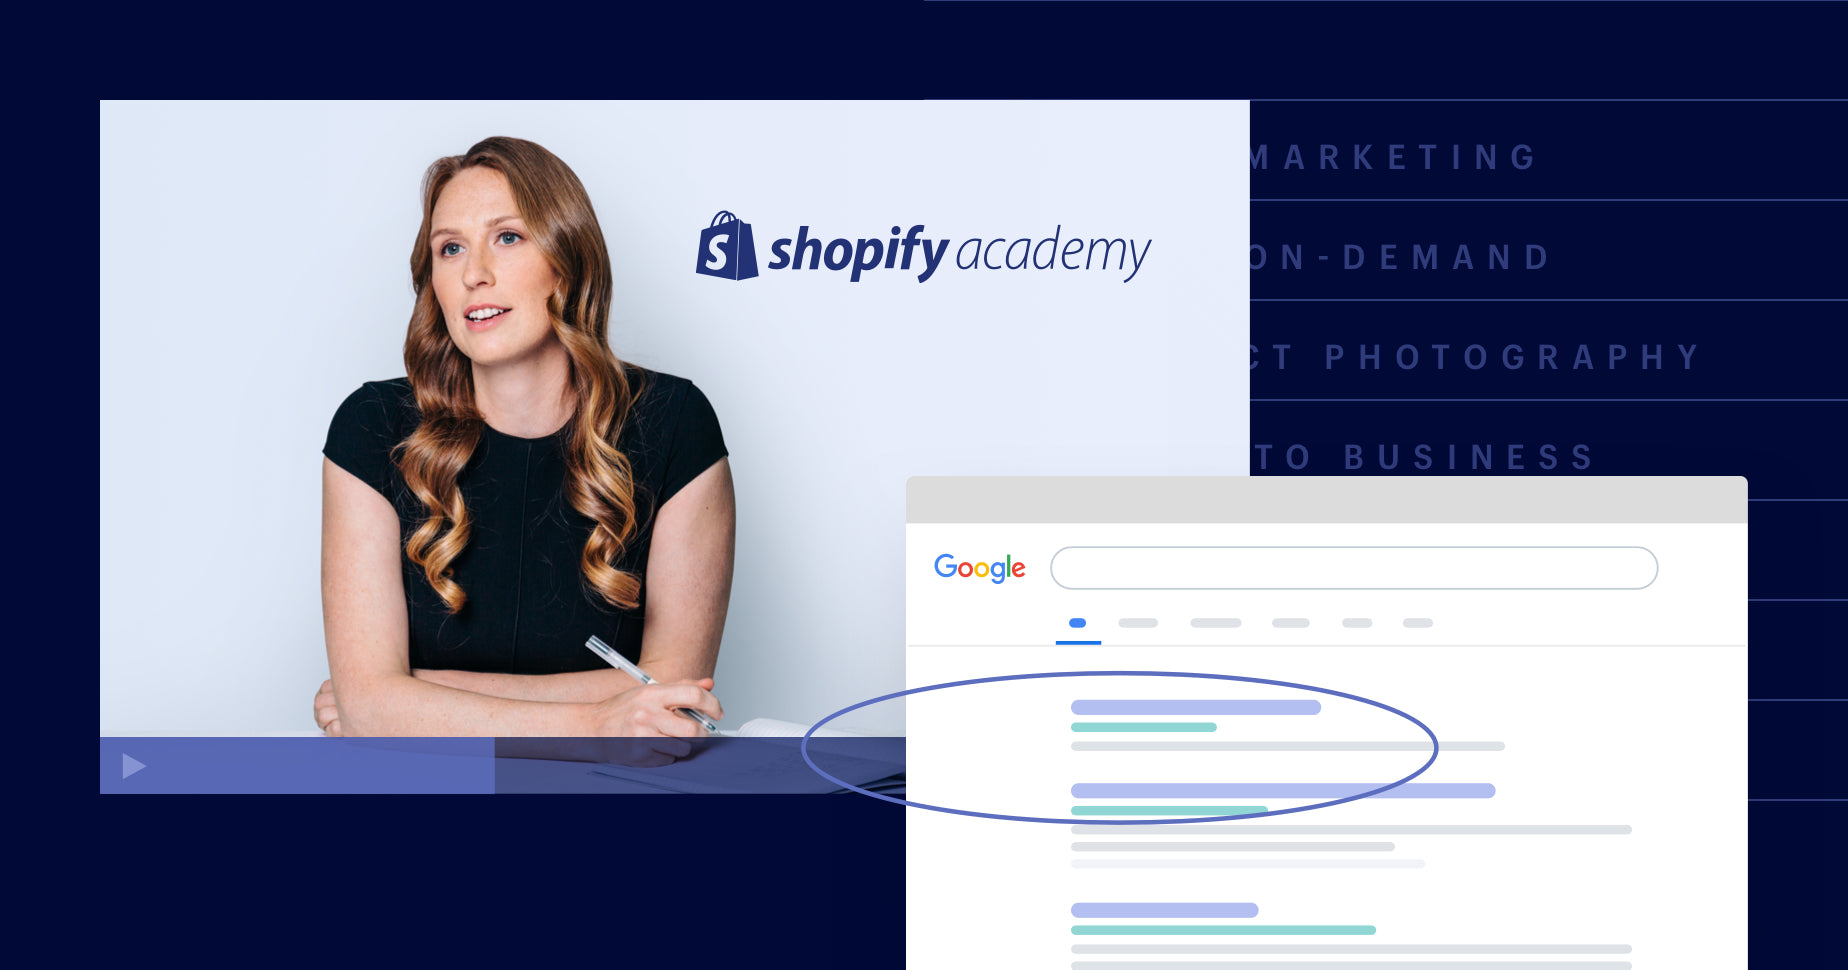 how to find and search shopify stores